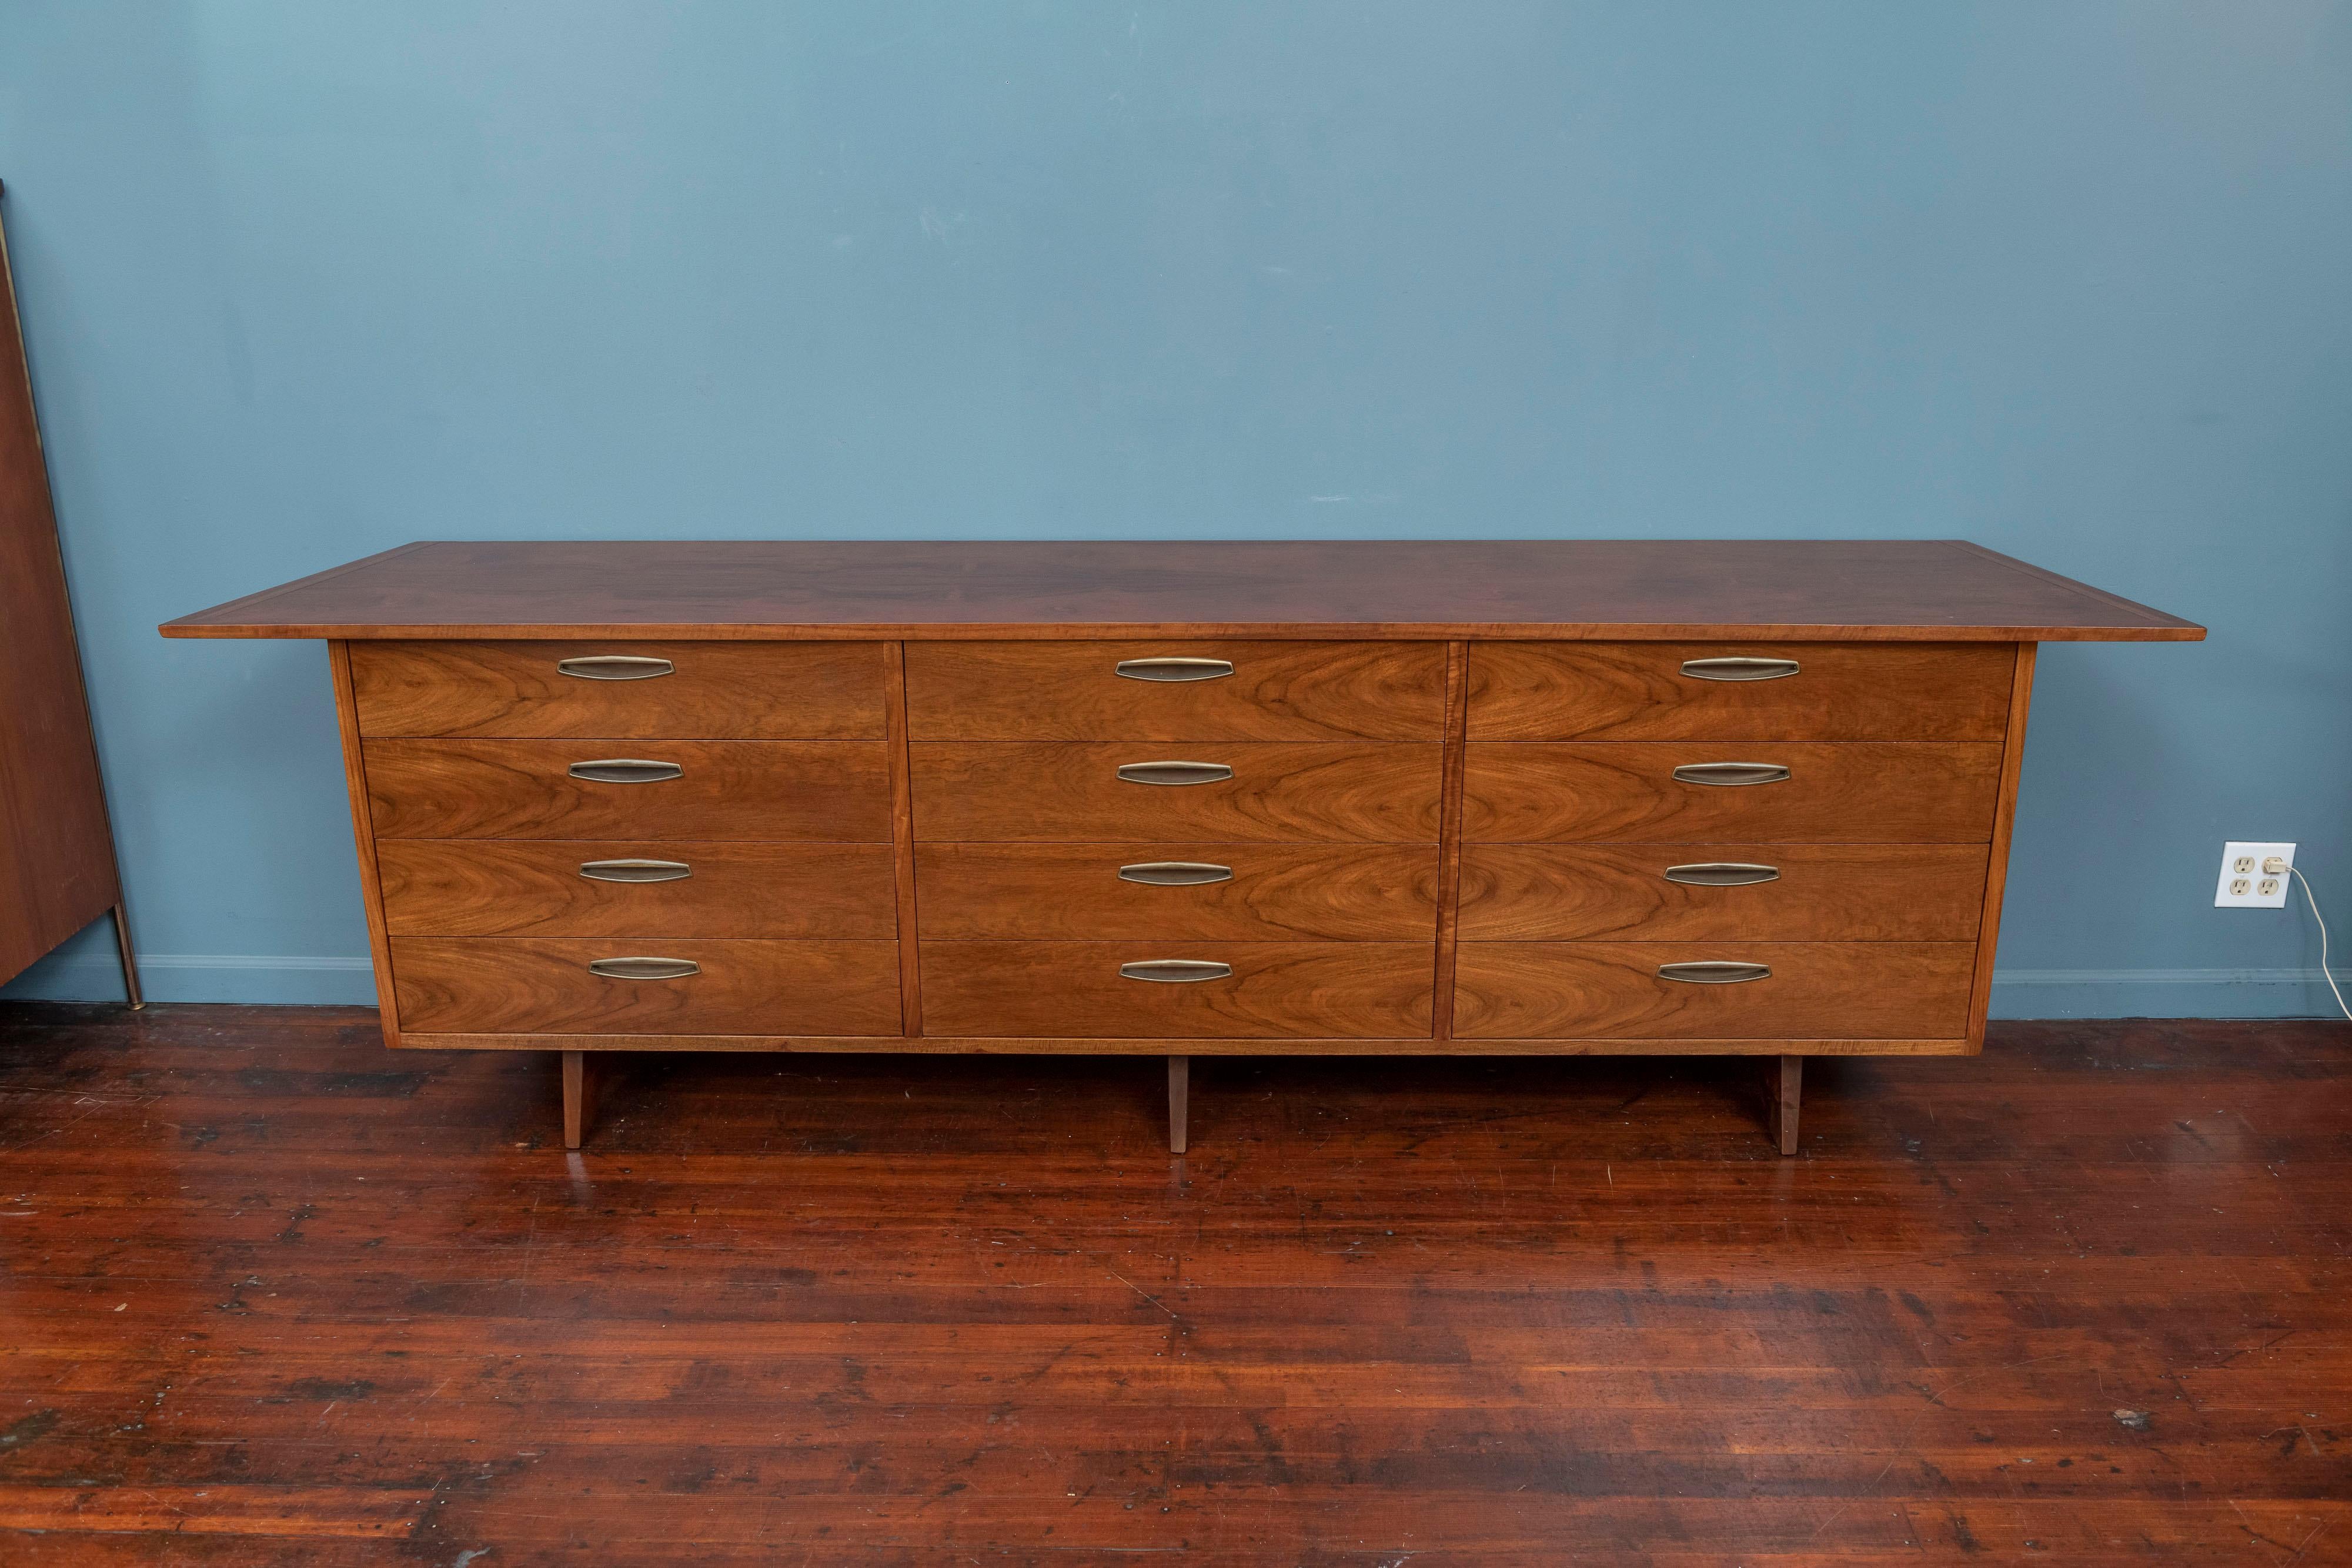 George Nakashima design dresser for his Origins line by Widdicomb, 1959. Dramatic wood grain figuring throughout the body of the case and trapezoidal shape top extending to 105